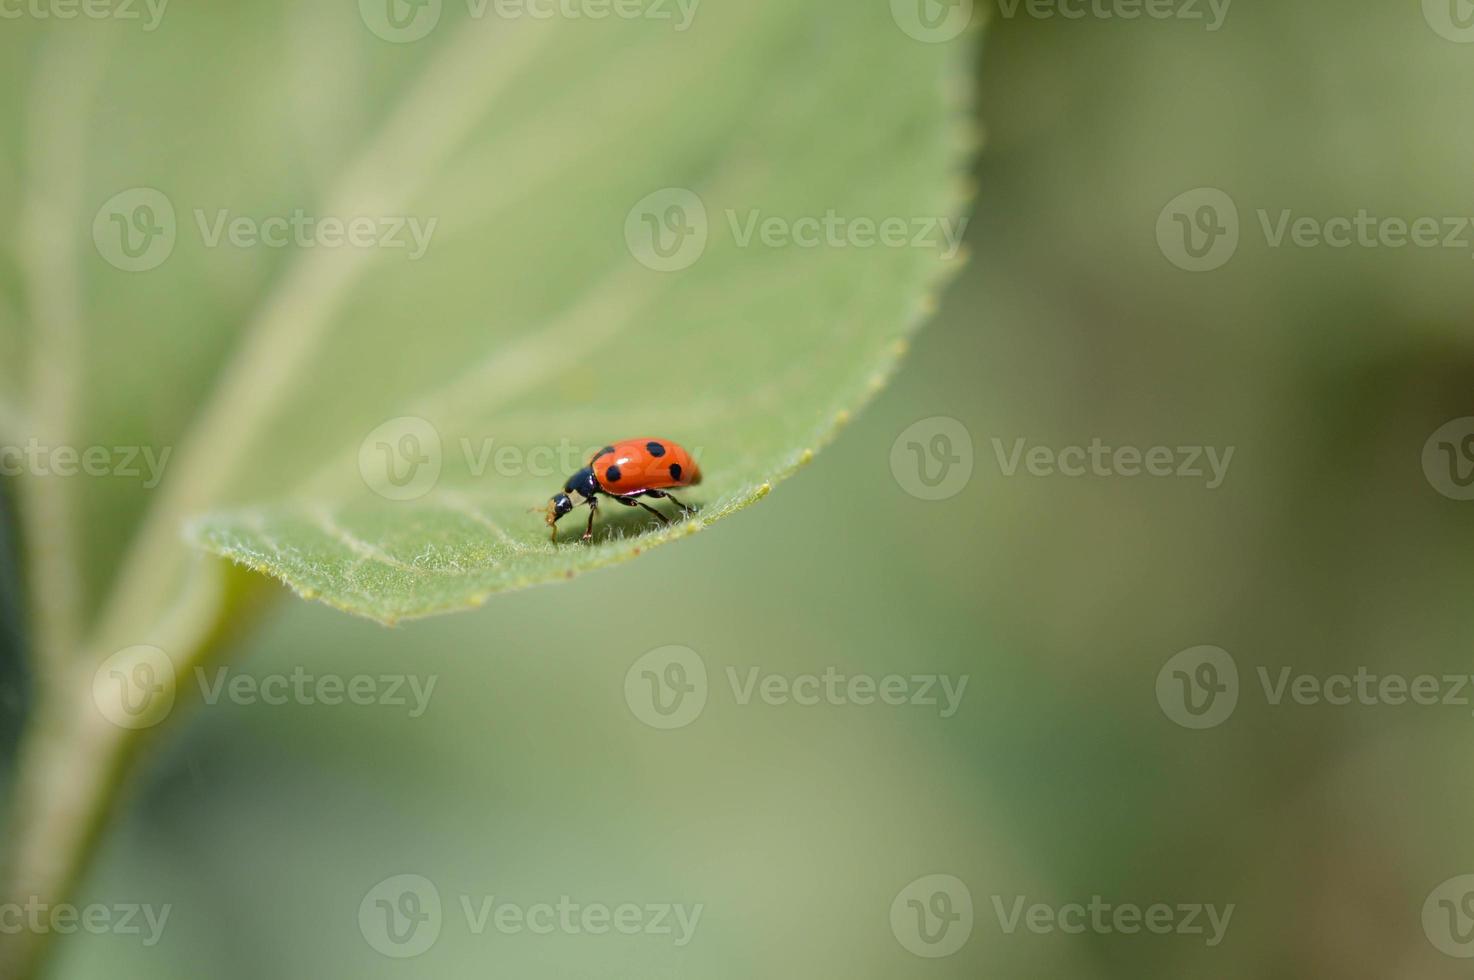 Ladybug on a green leaf macro small red bug with black dots. photo